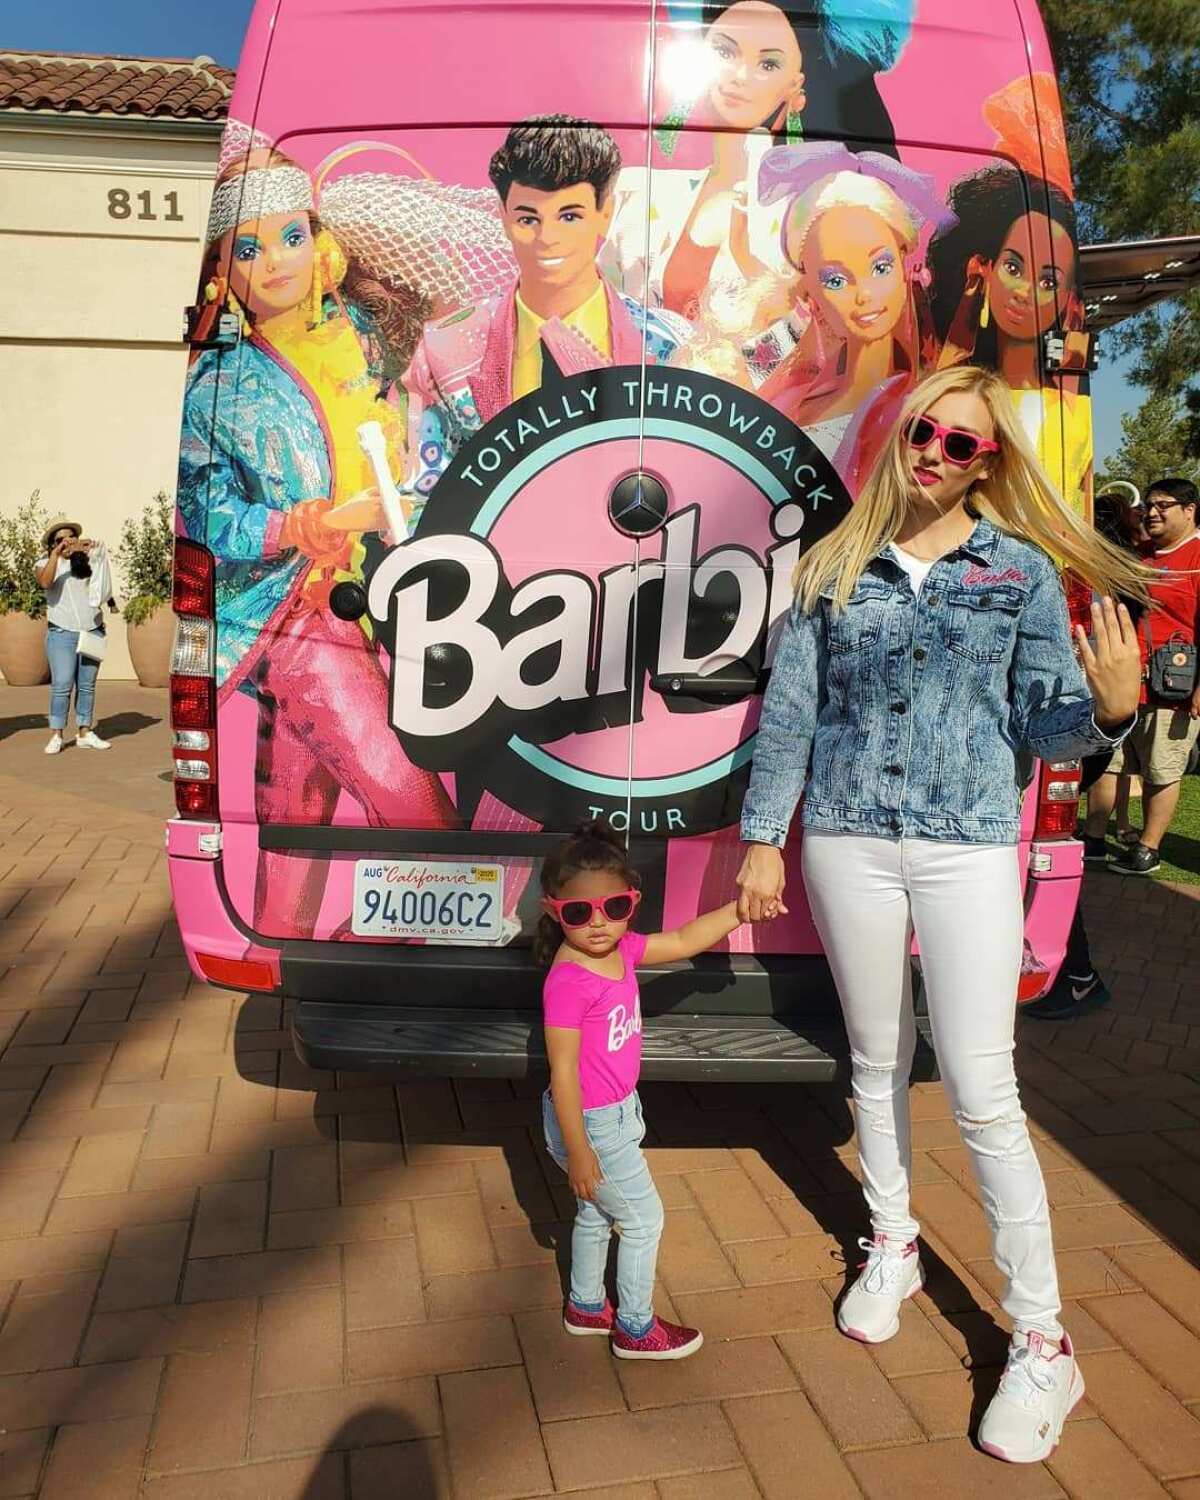 Carmen Villegas, of Soledad, drove for five hours to the Irvine Spectrum Center on Nov. 16, so she and her family could catch the Barbie van in the beginning of its "Totally Throwback Tour."